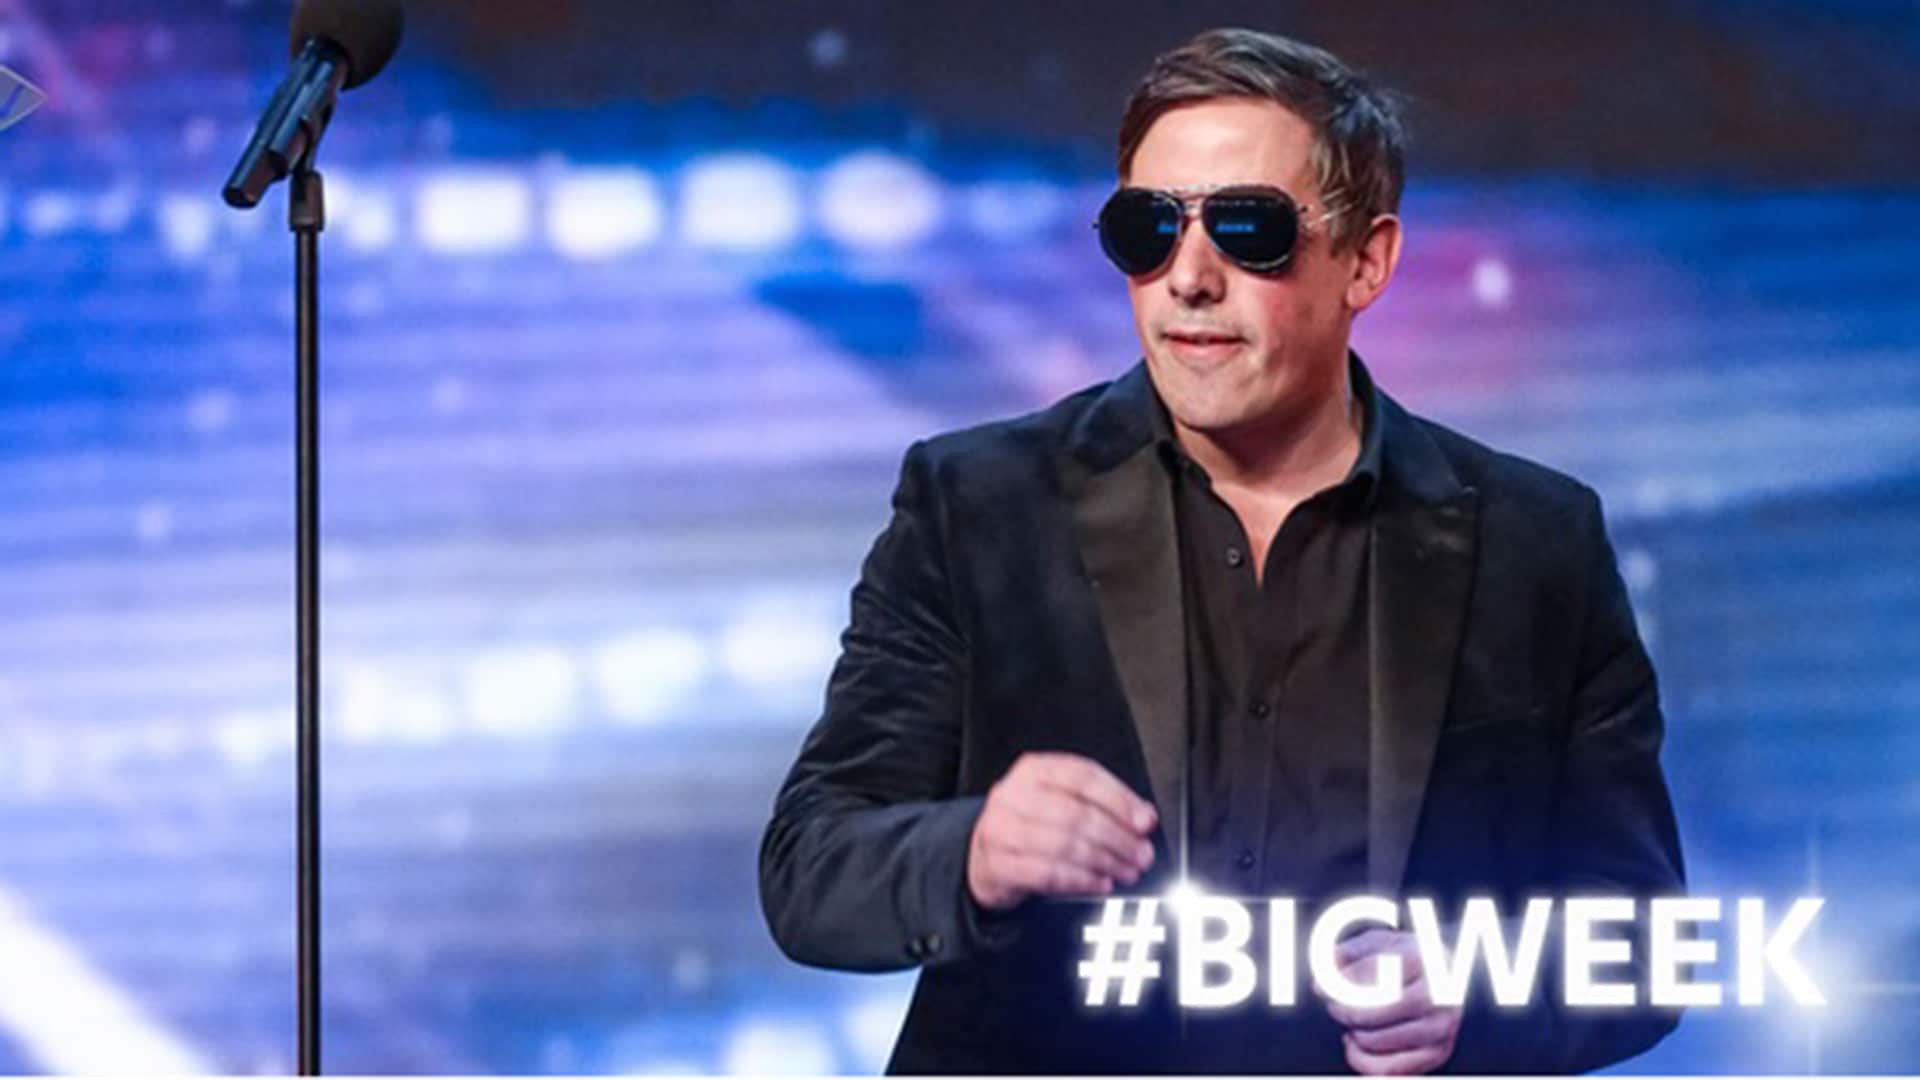 Christian Lee performing in Britain's Got Talent, wearing sunglasses and standing next to a mircropone